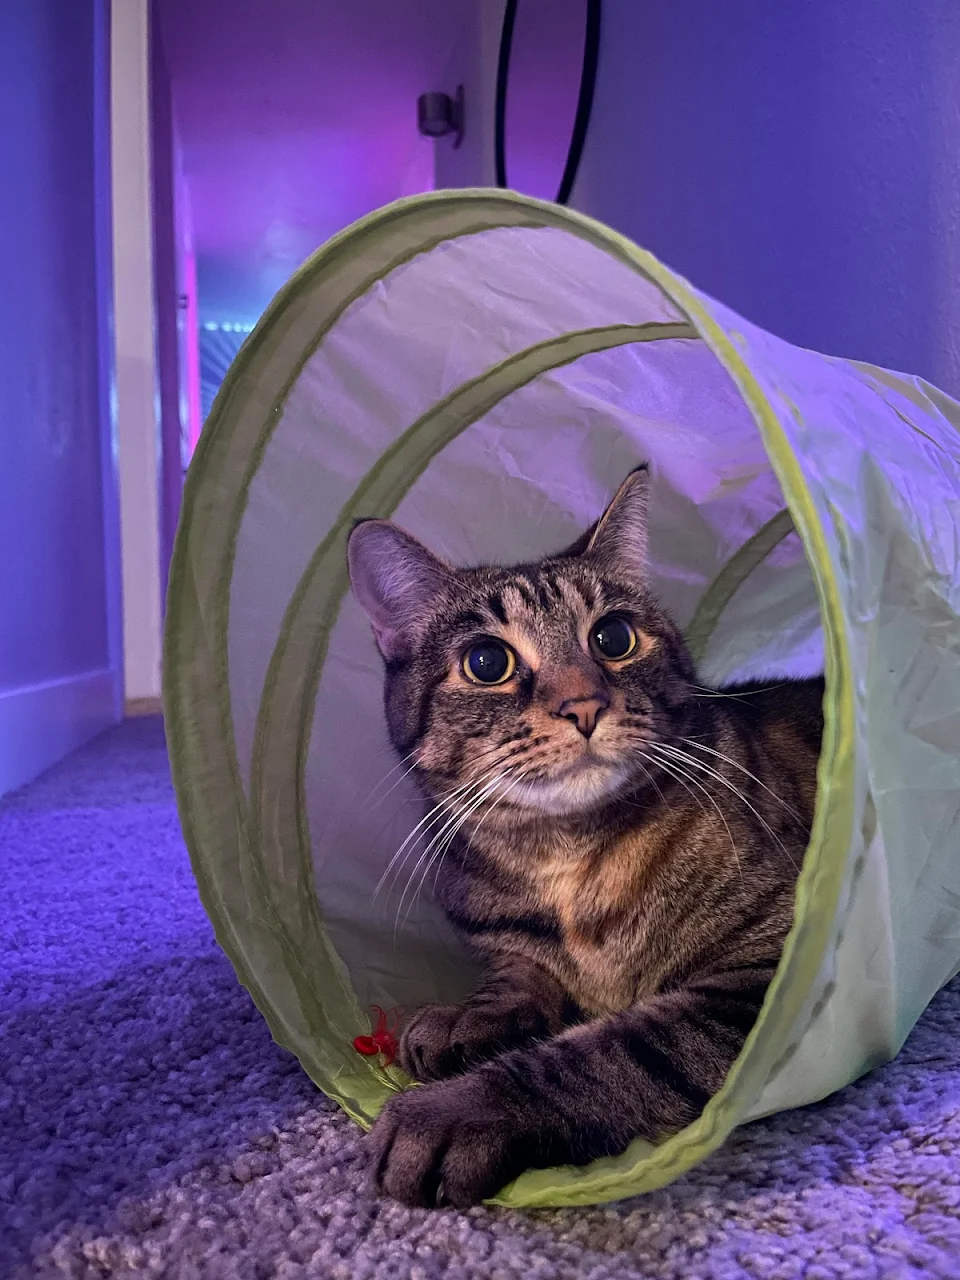 she loves her tunnel! Thanks to the redditor that gifted this when Reddit gifts was still around ❤️